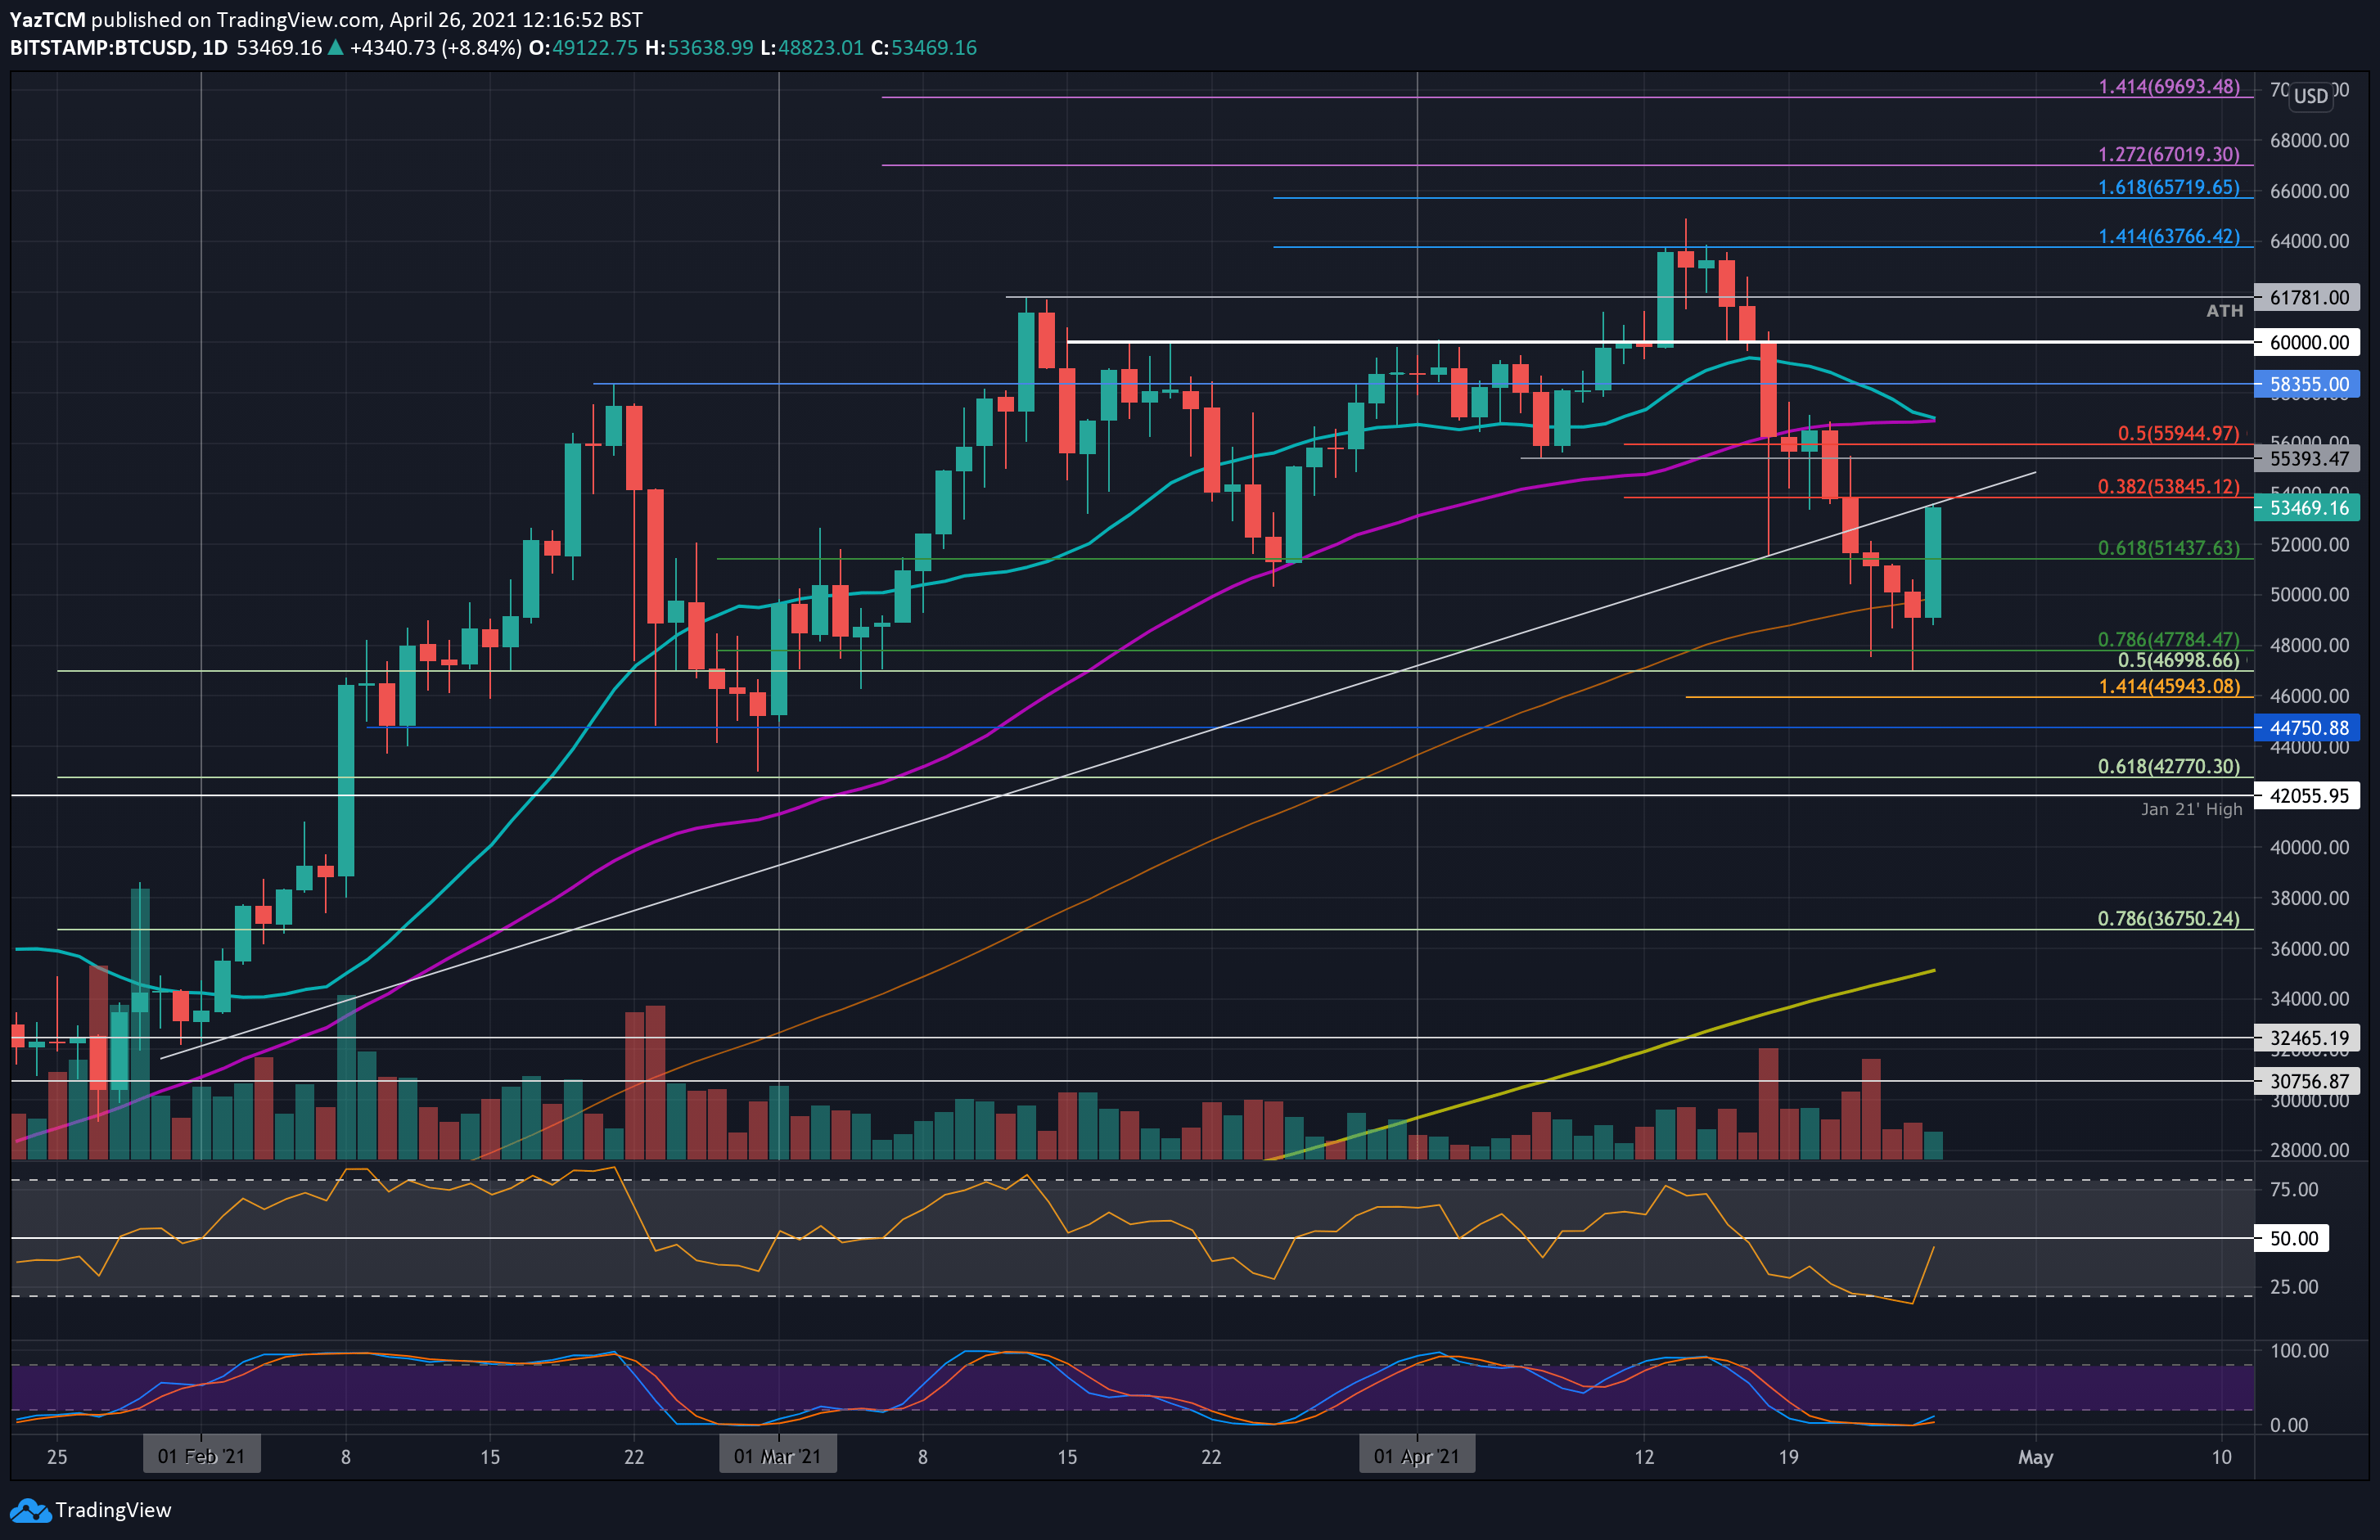 Bitcoin-price-analysis:-is-btc-back-bullish-after-touching-long-term-support-from-march-2020?